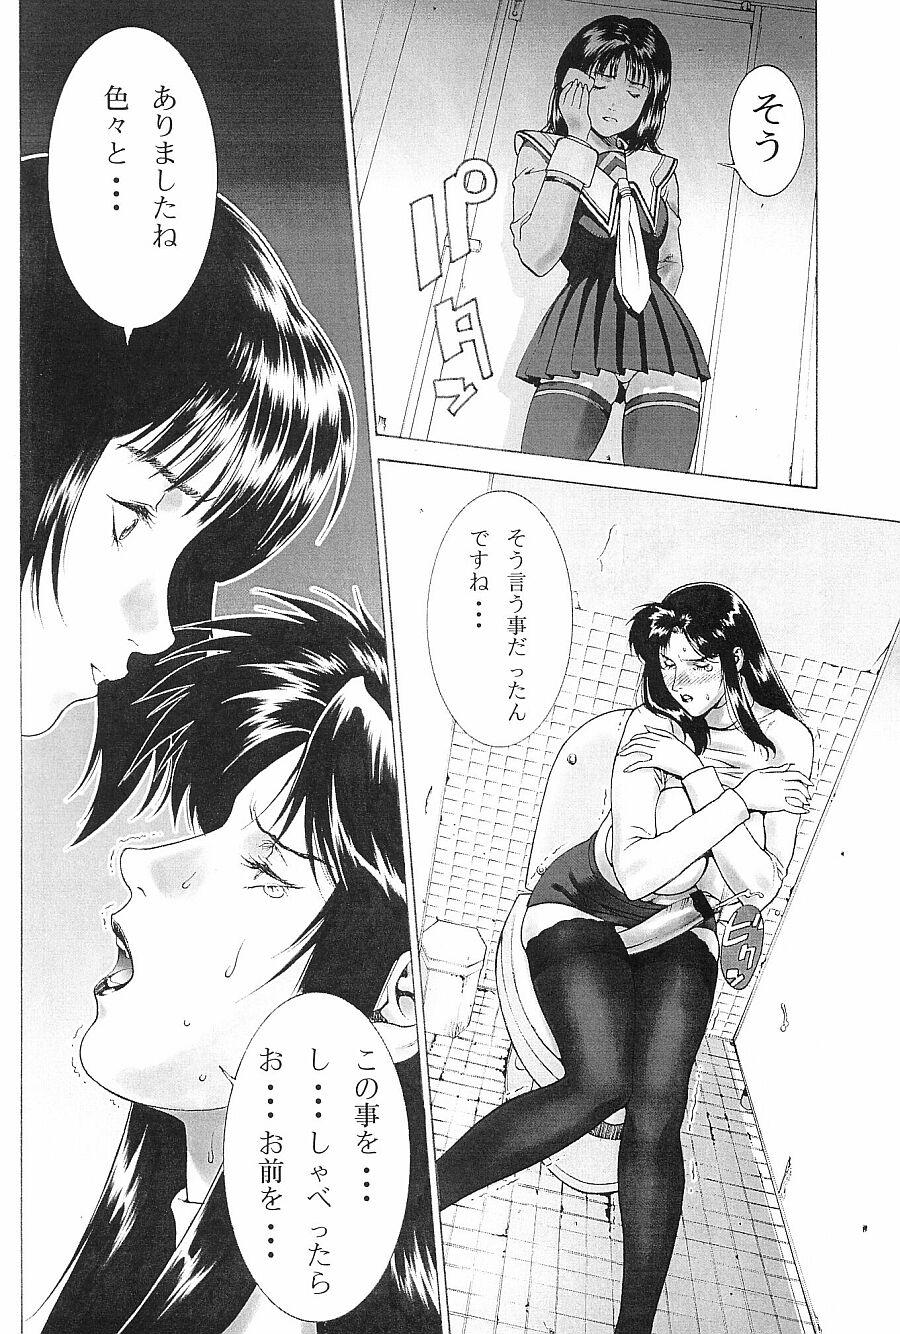 Perfect Tits Crazy-D Act 06 - Is Gundam 0083 This - Page 10